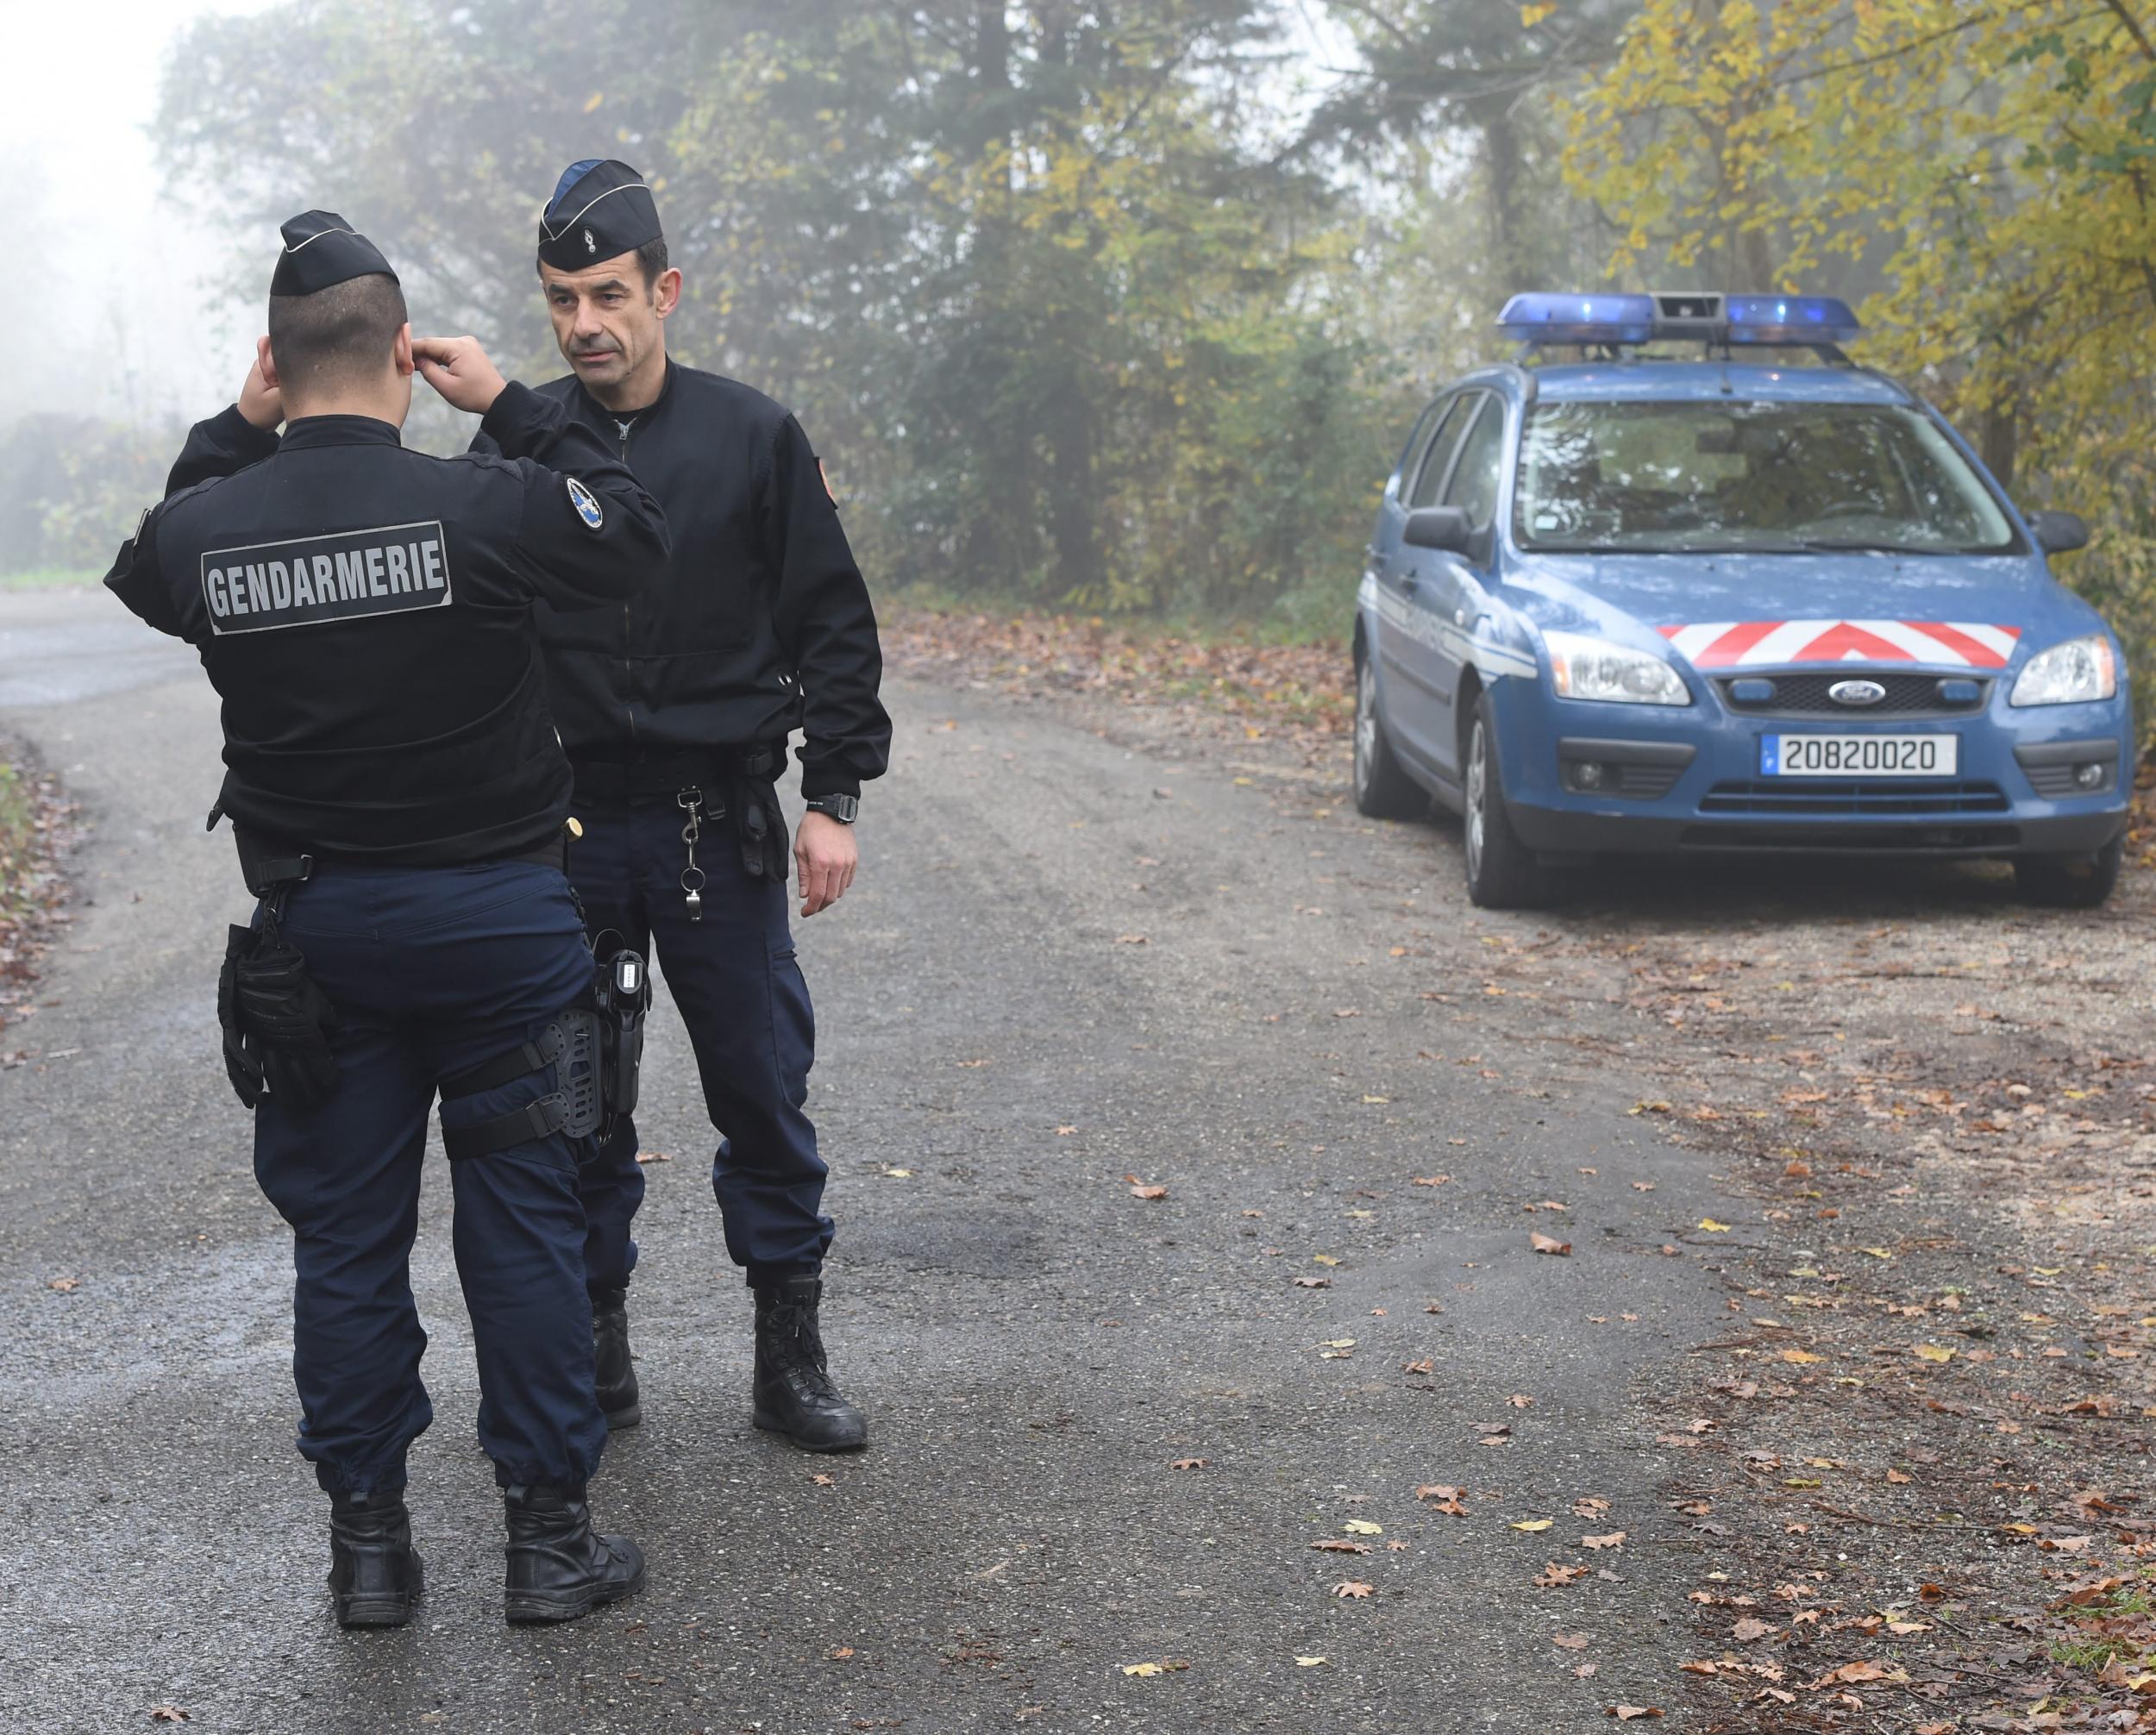 Local police sealed off the road leading to their home in Foulayronnes, south-west France